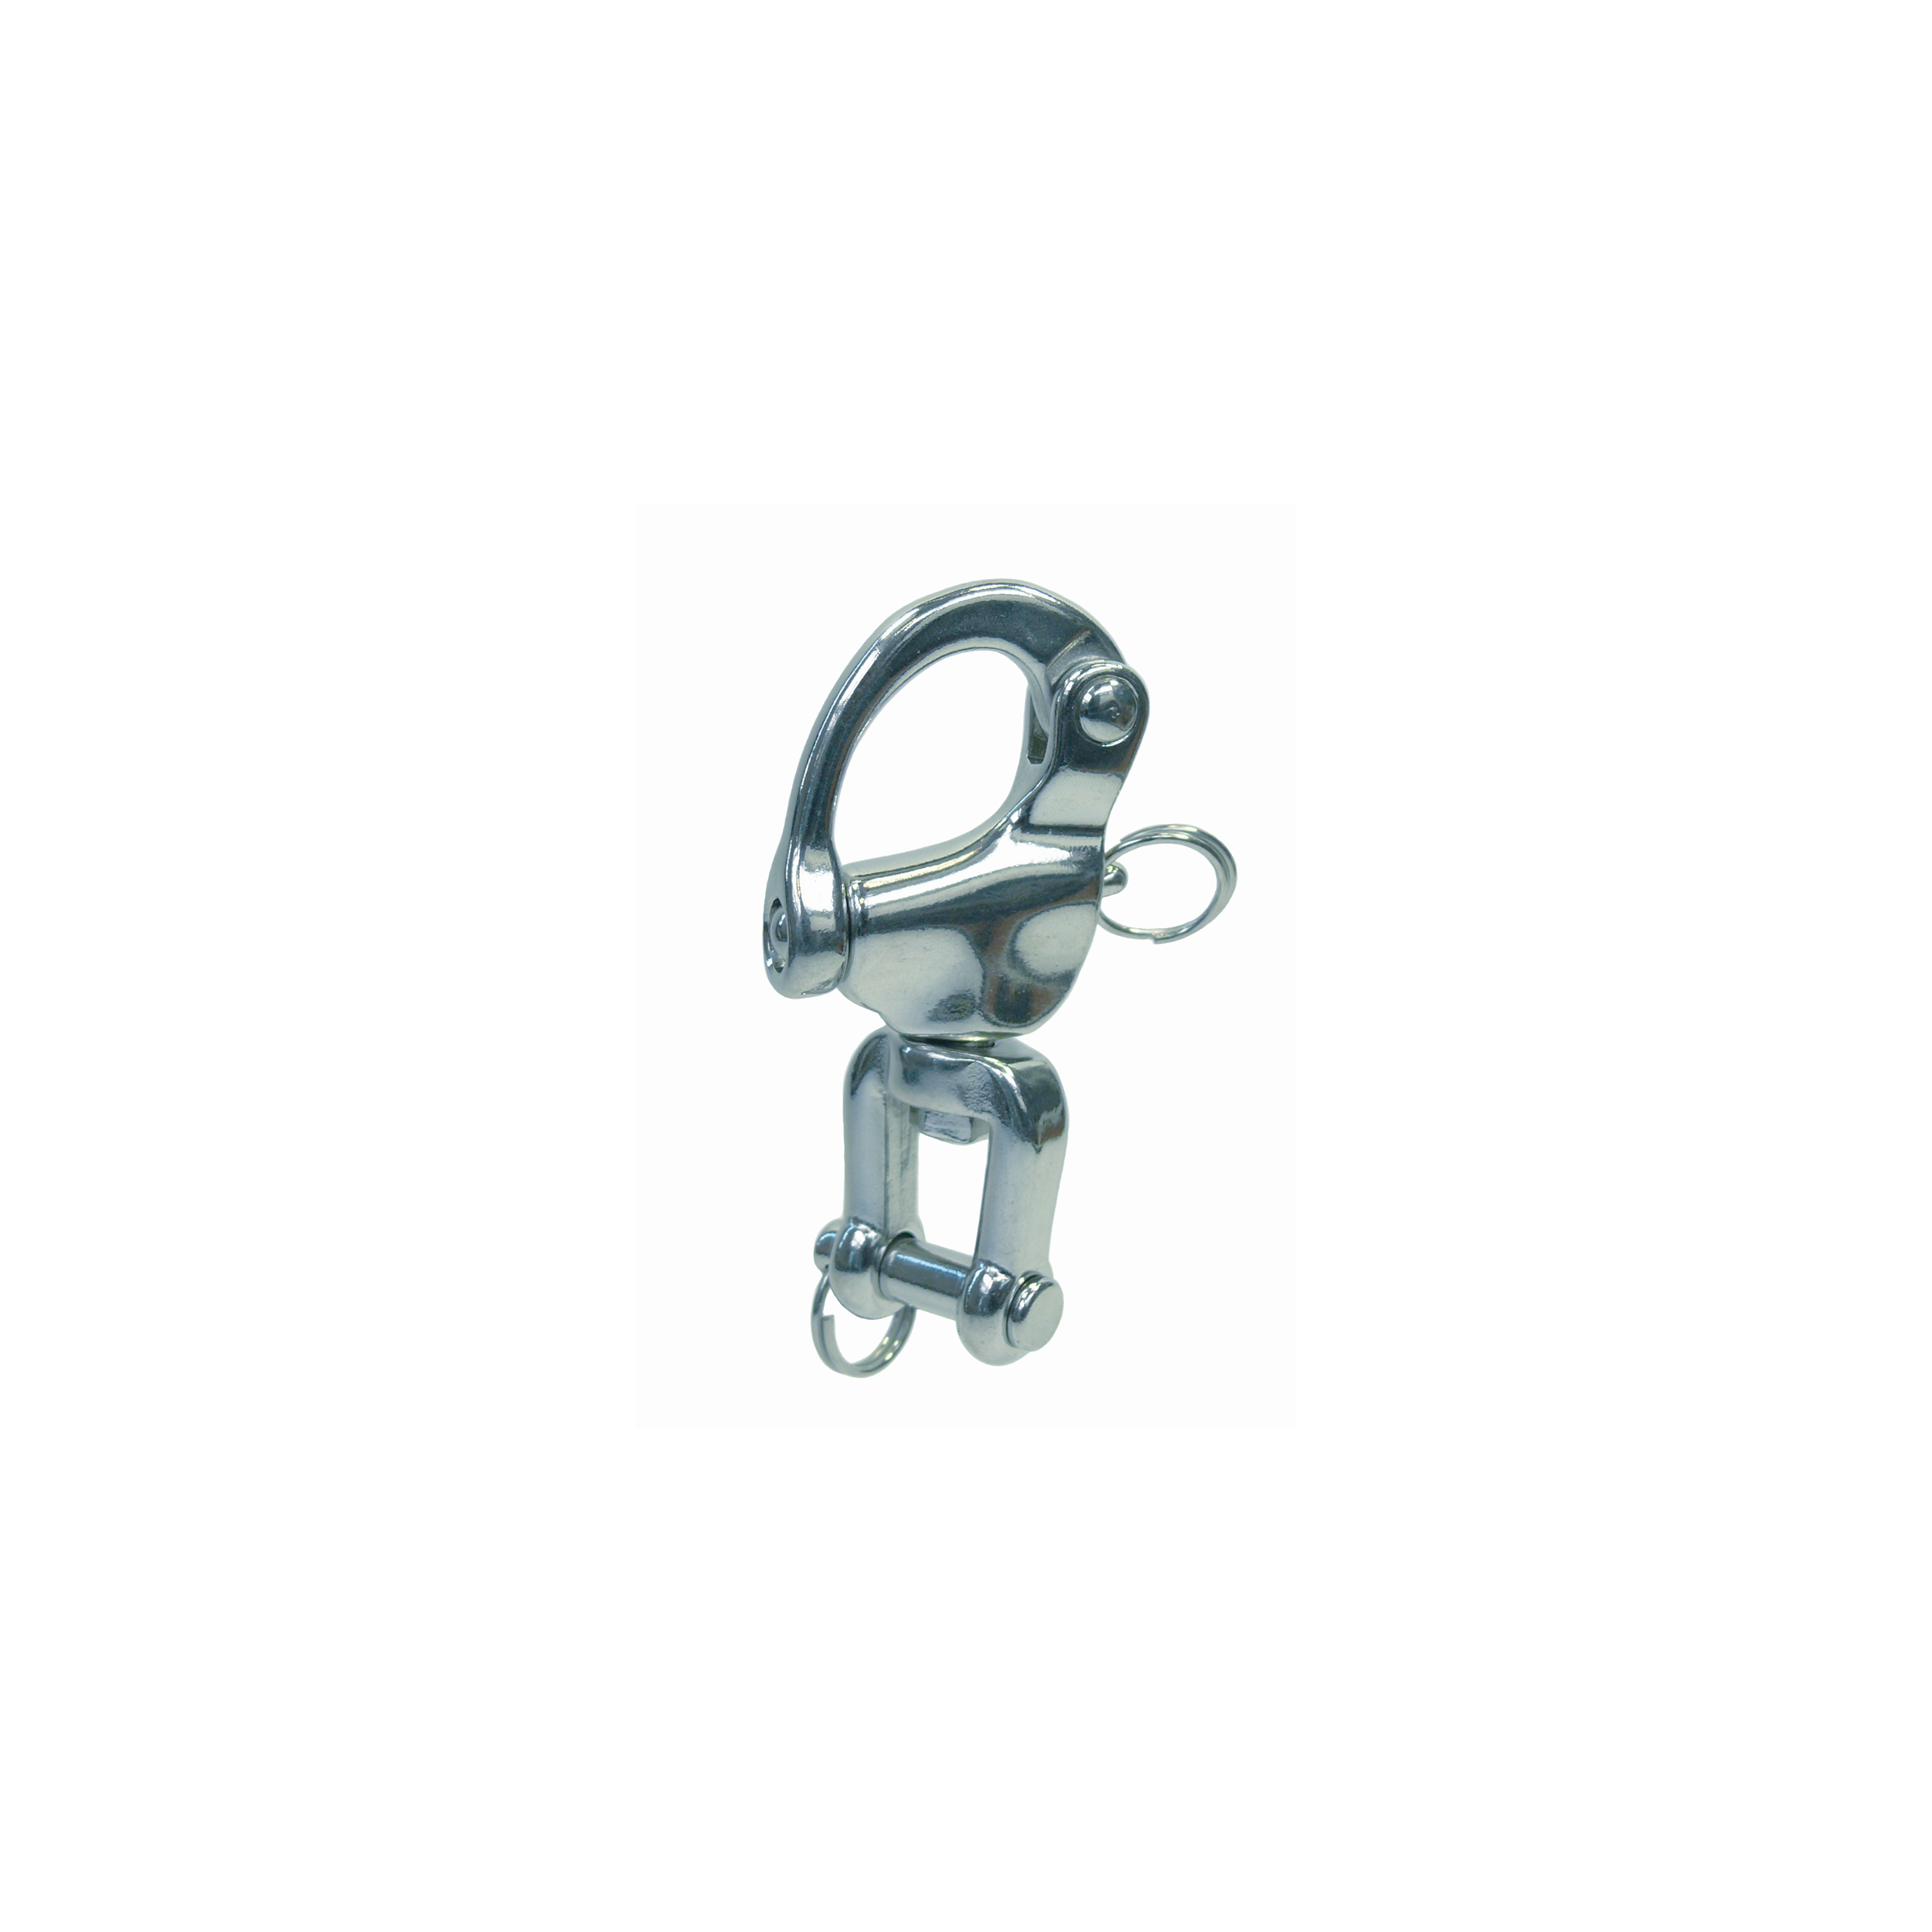 Snap shackle with swivel shackle A4  128mm